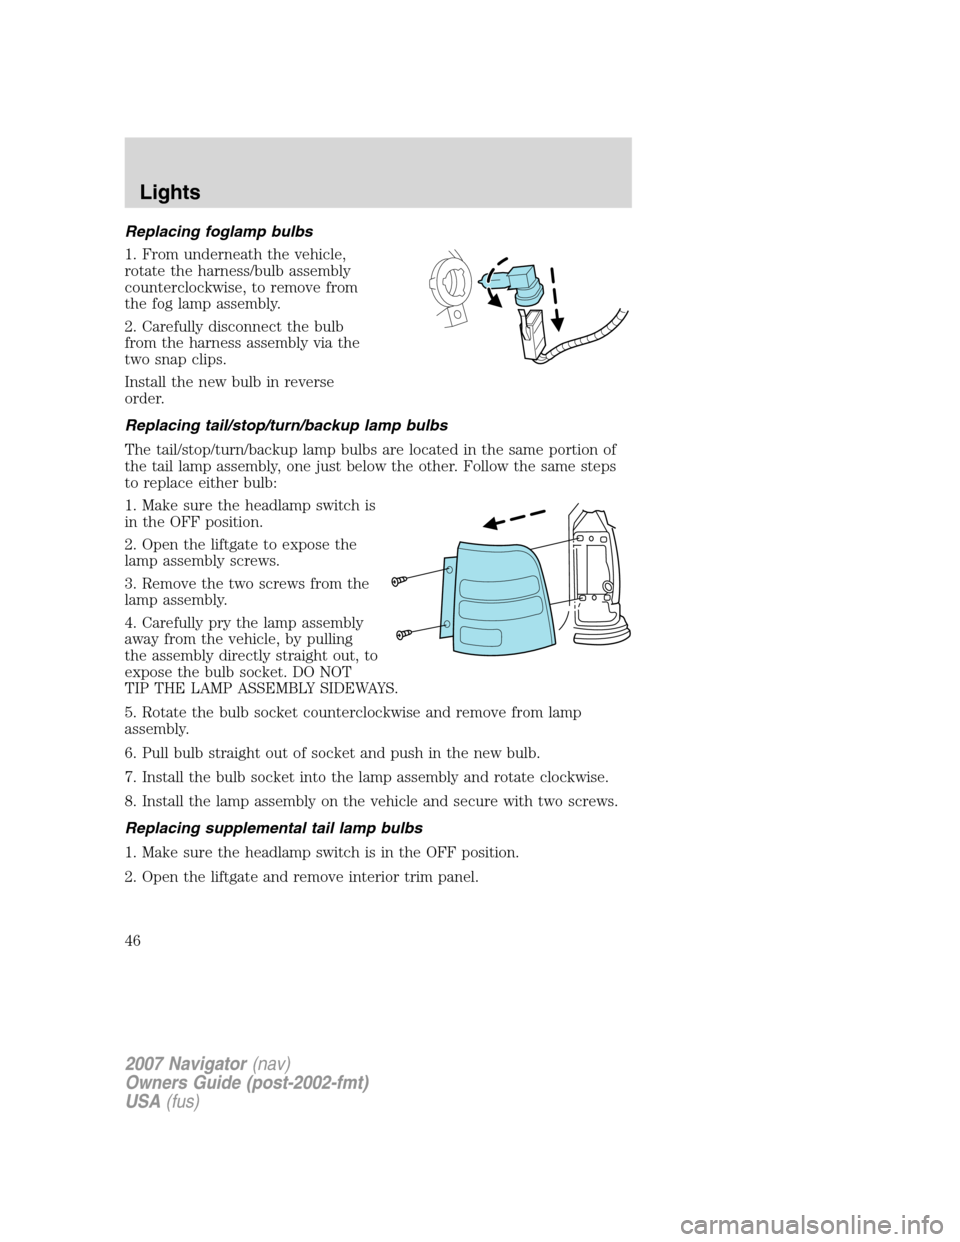 LINCOLN NAVIGATOR 2007 Service Manual Replacing foglamp bulbs
1. From underneath the vehicle,
rotate the harness/bulb assembly
counterclockwise, to remove from
the fog lamp assembly.
2. Carefully disconnect the bulb
from the harness assem